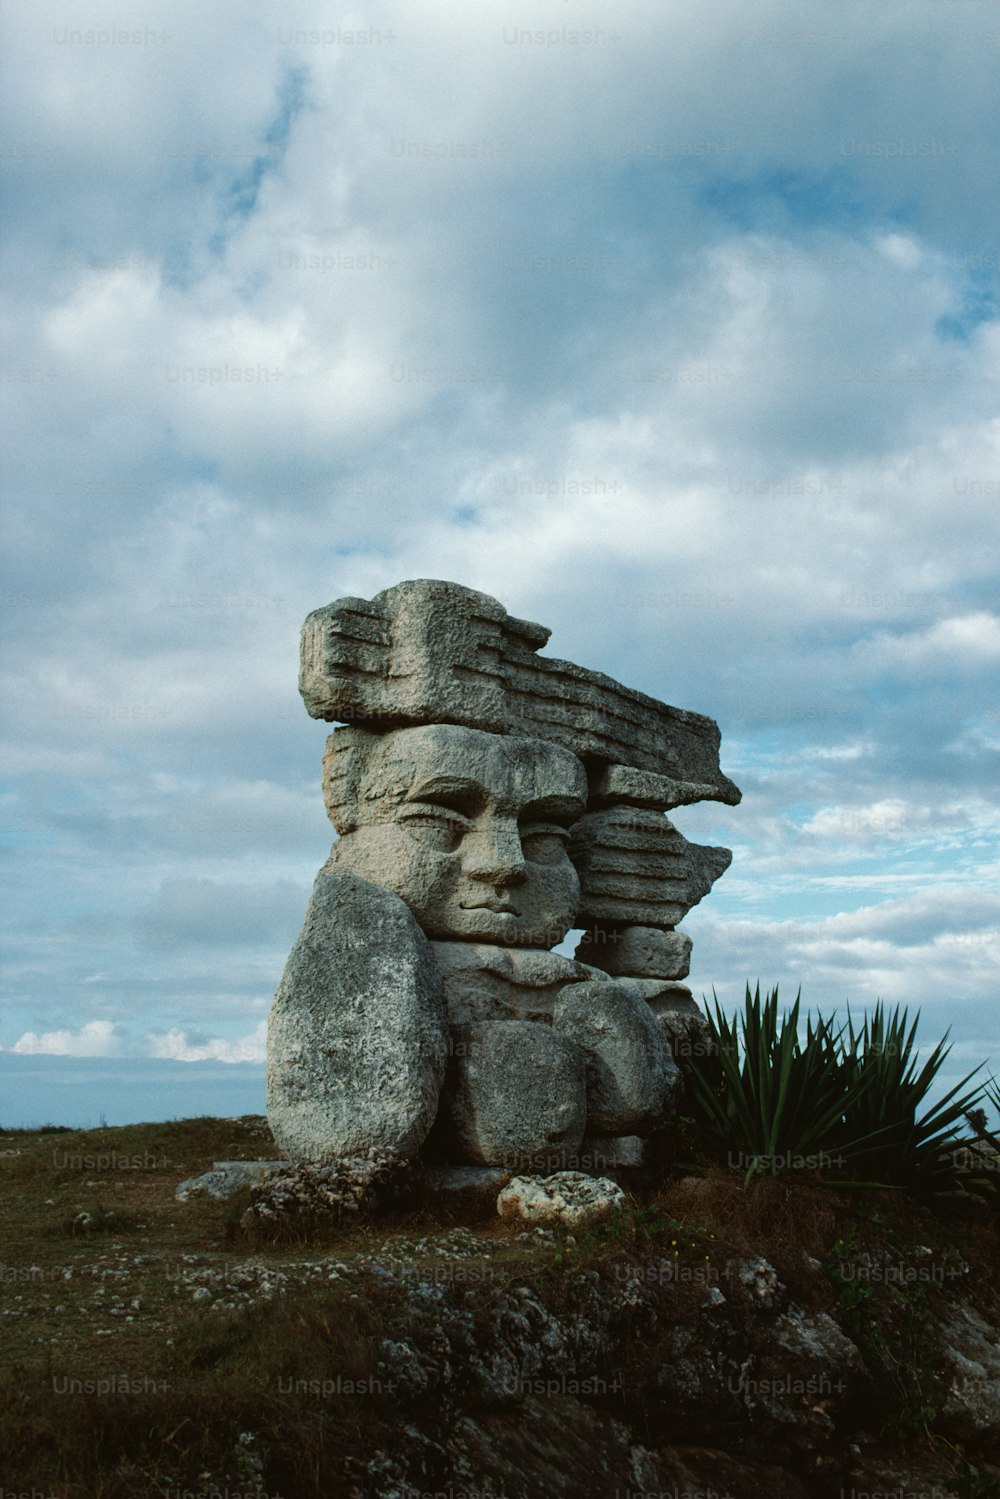 a large stone statue sitting on top of a lush green field